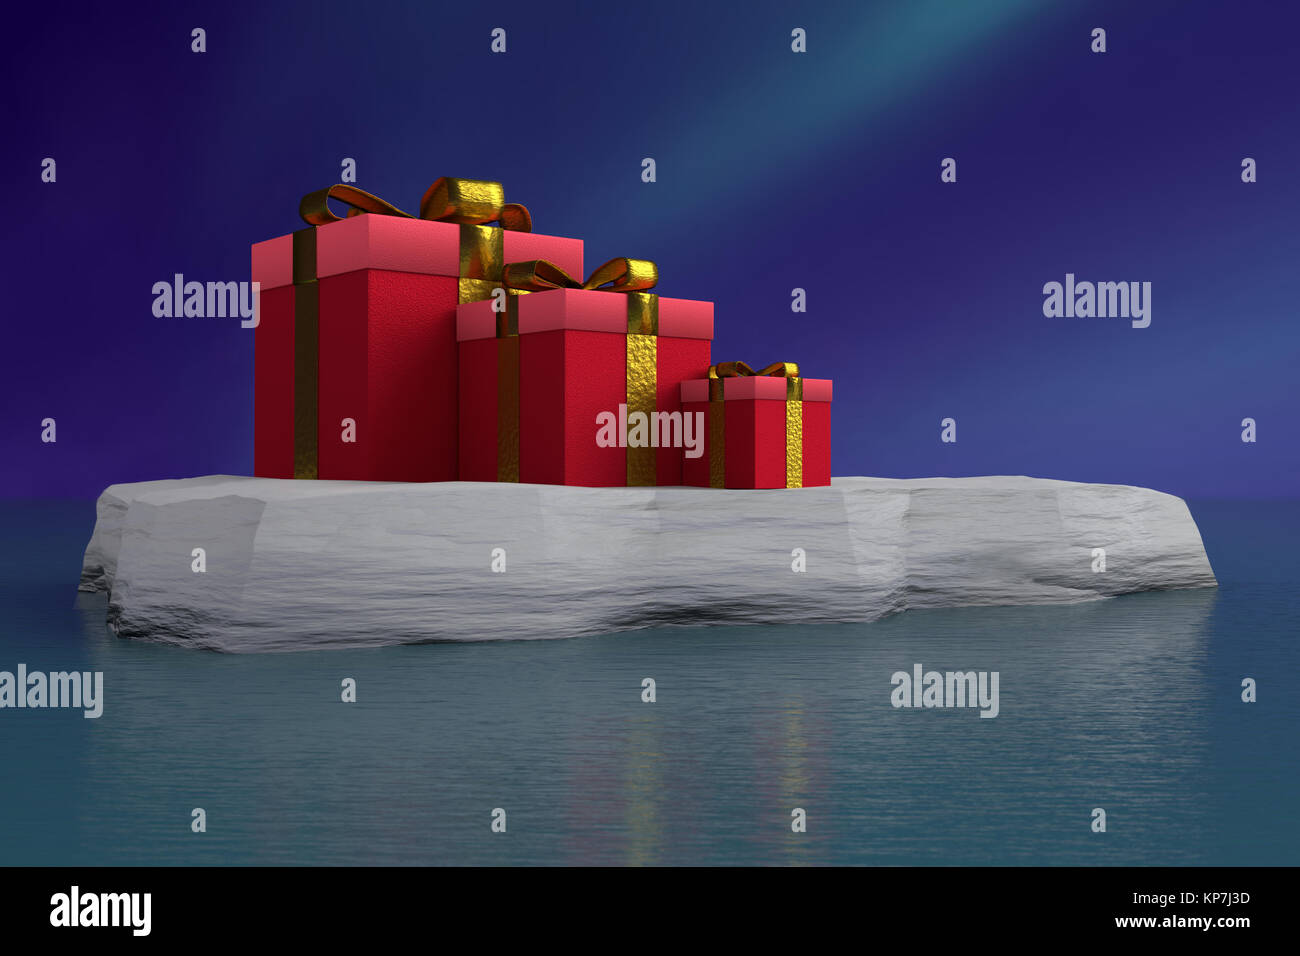 3D rendering of three red xmas present boxes with golden ribbons placed on ice floe floating on sea surface against dark blue sky Stock Photo